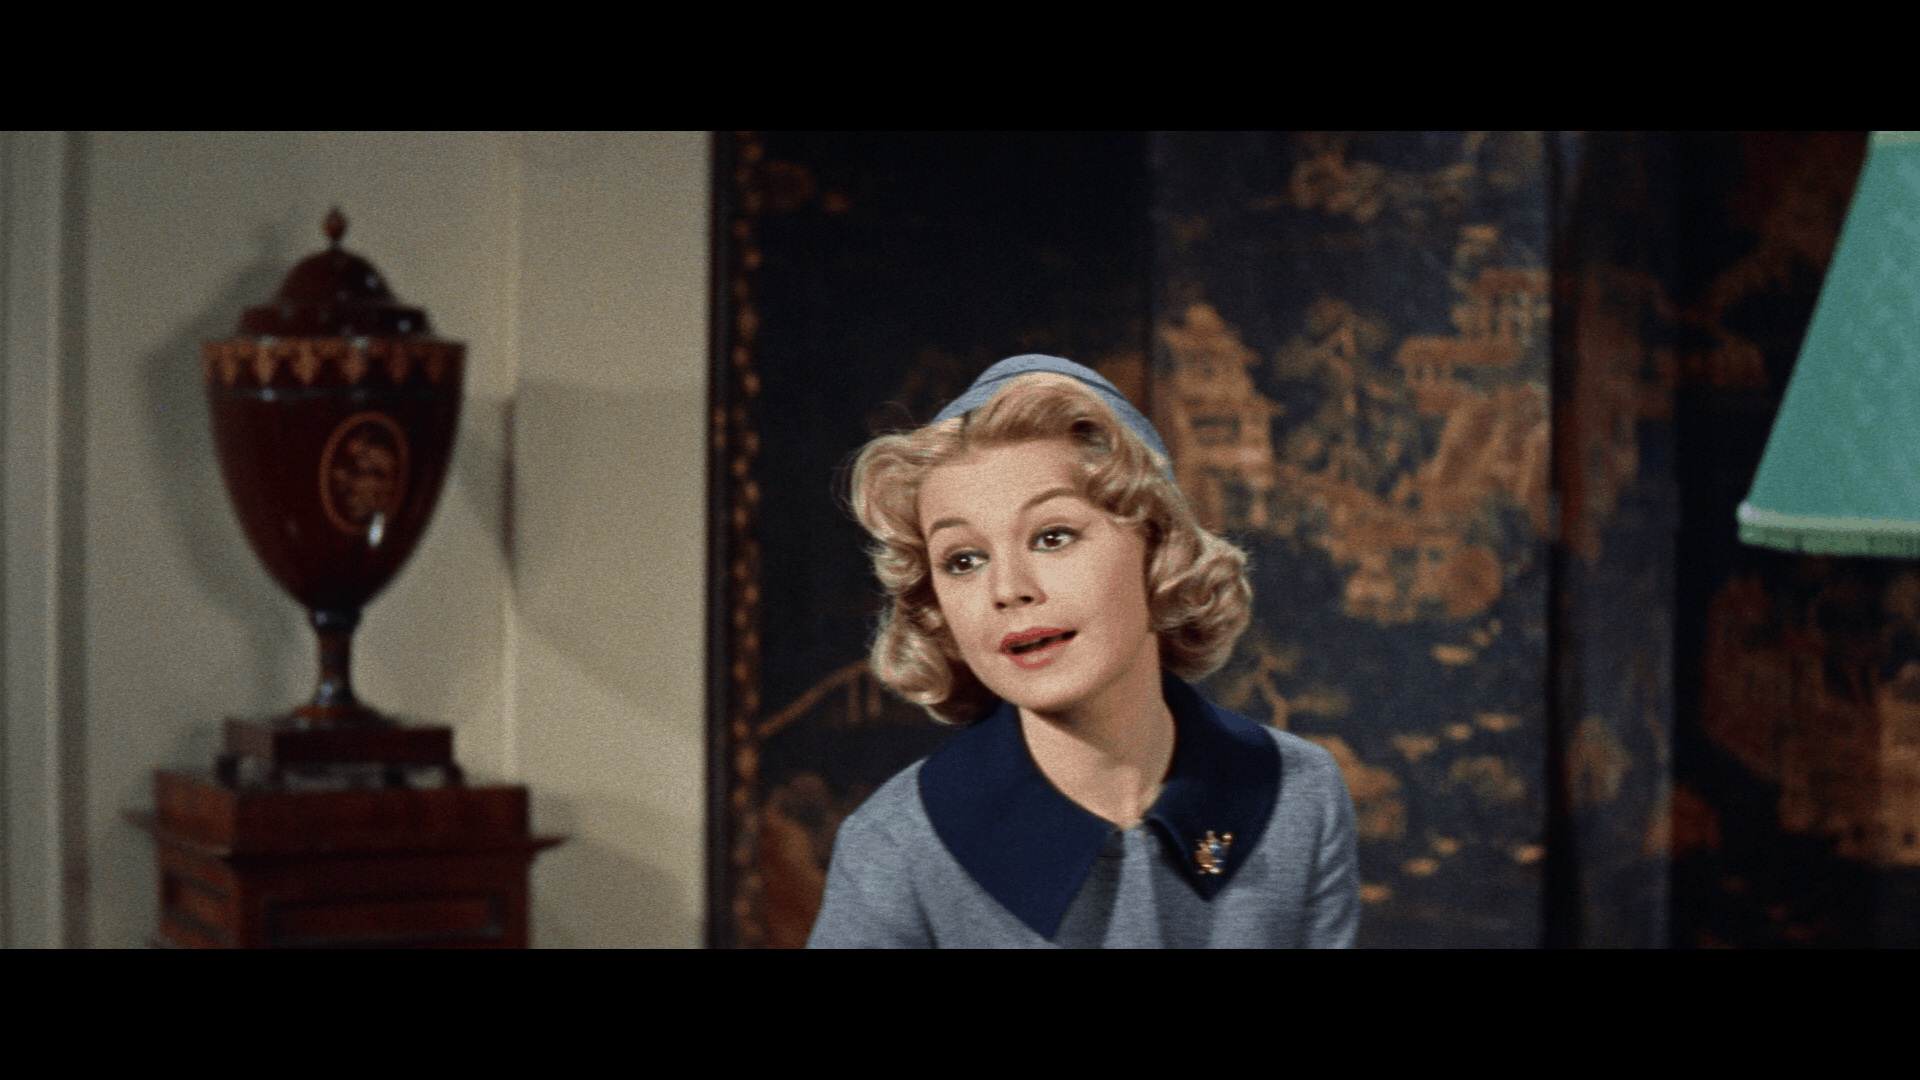 The Reluctant Debutante [Warner Archive Blu-ray review] 4